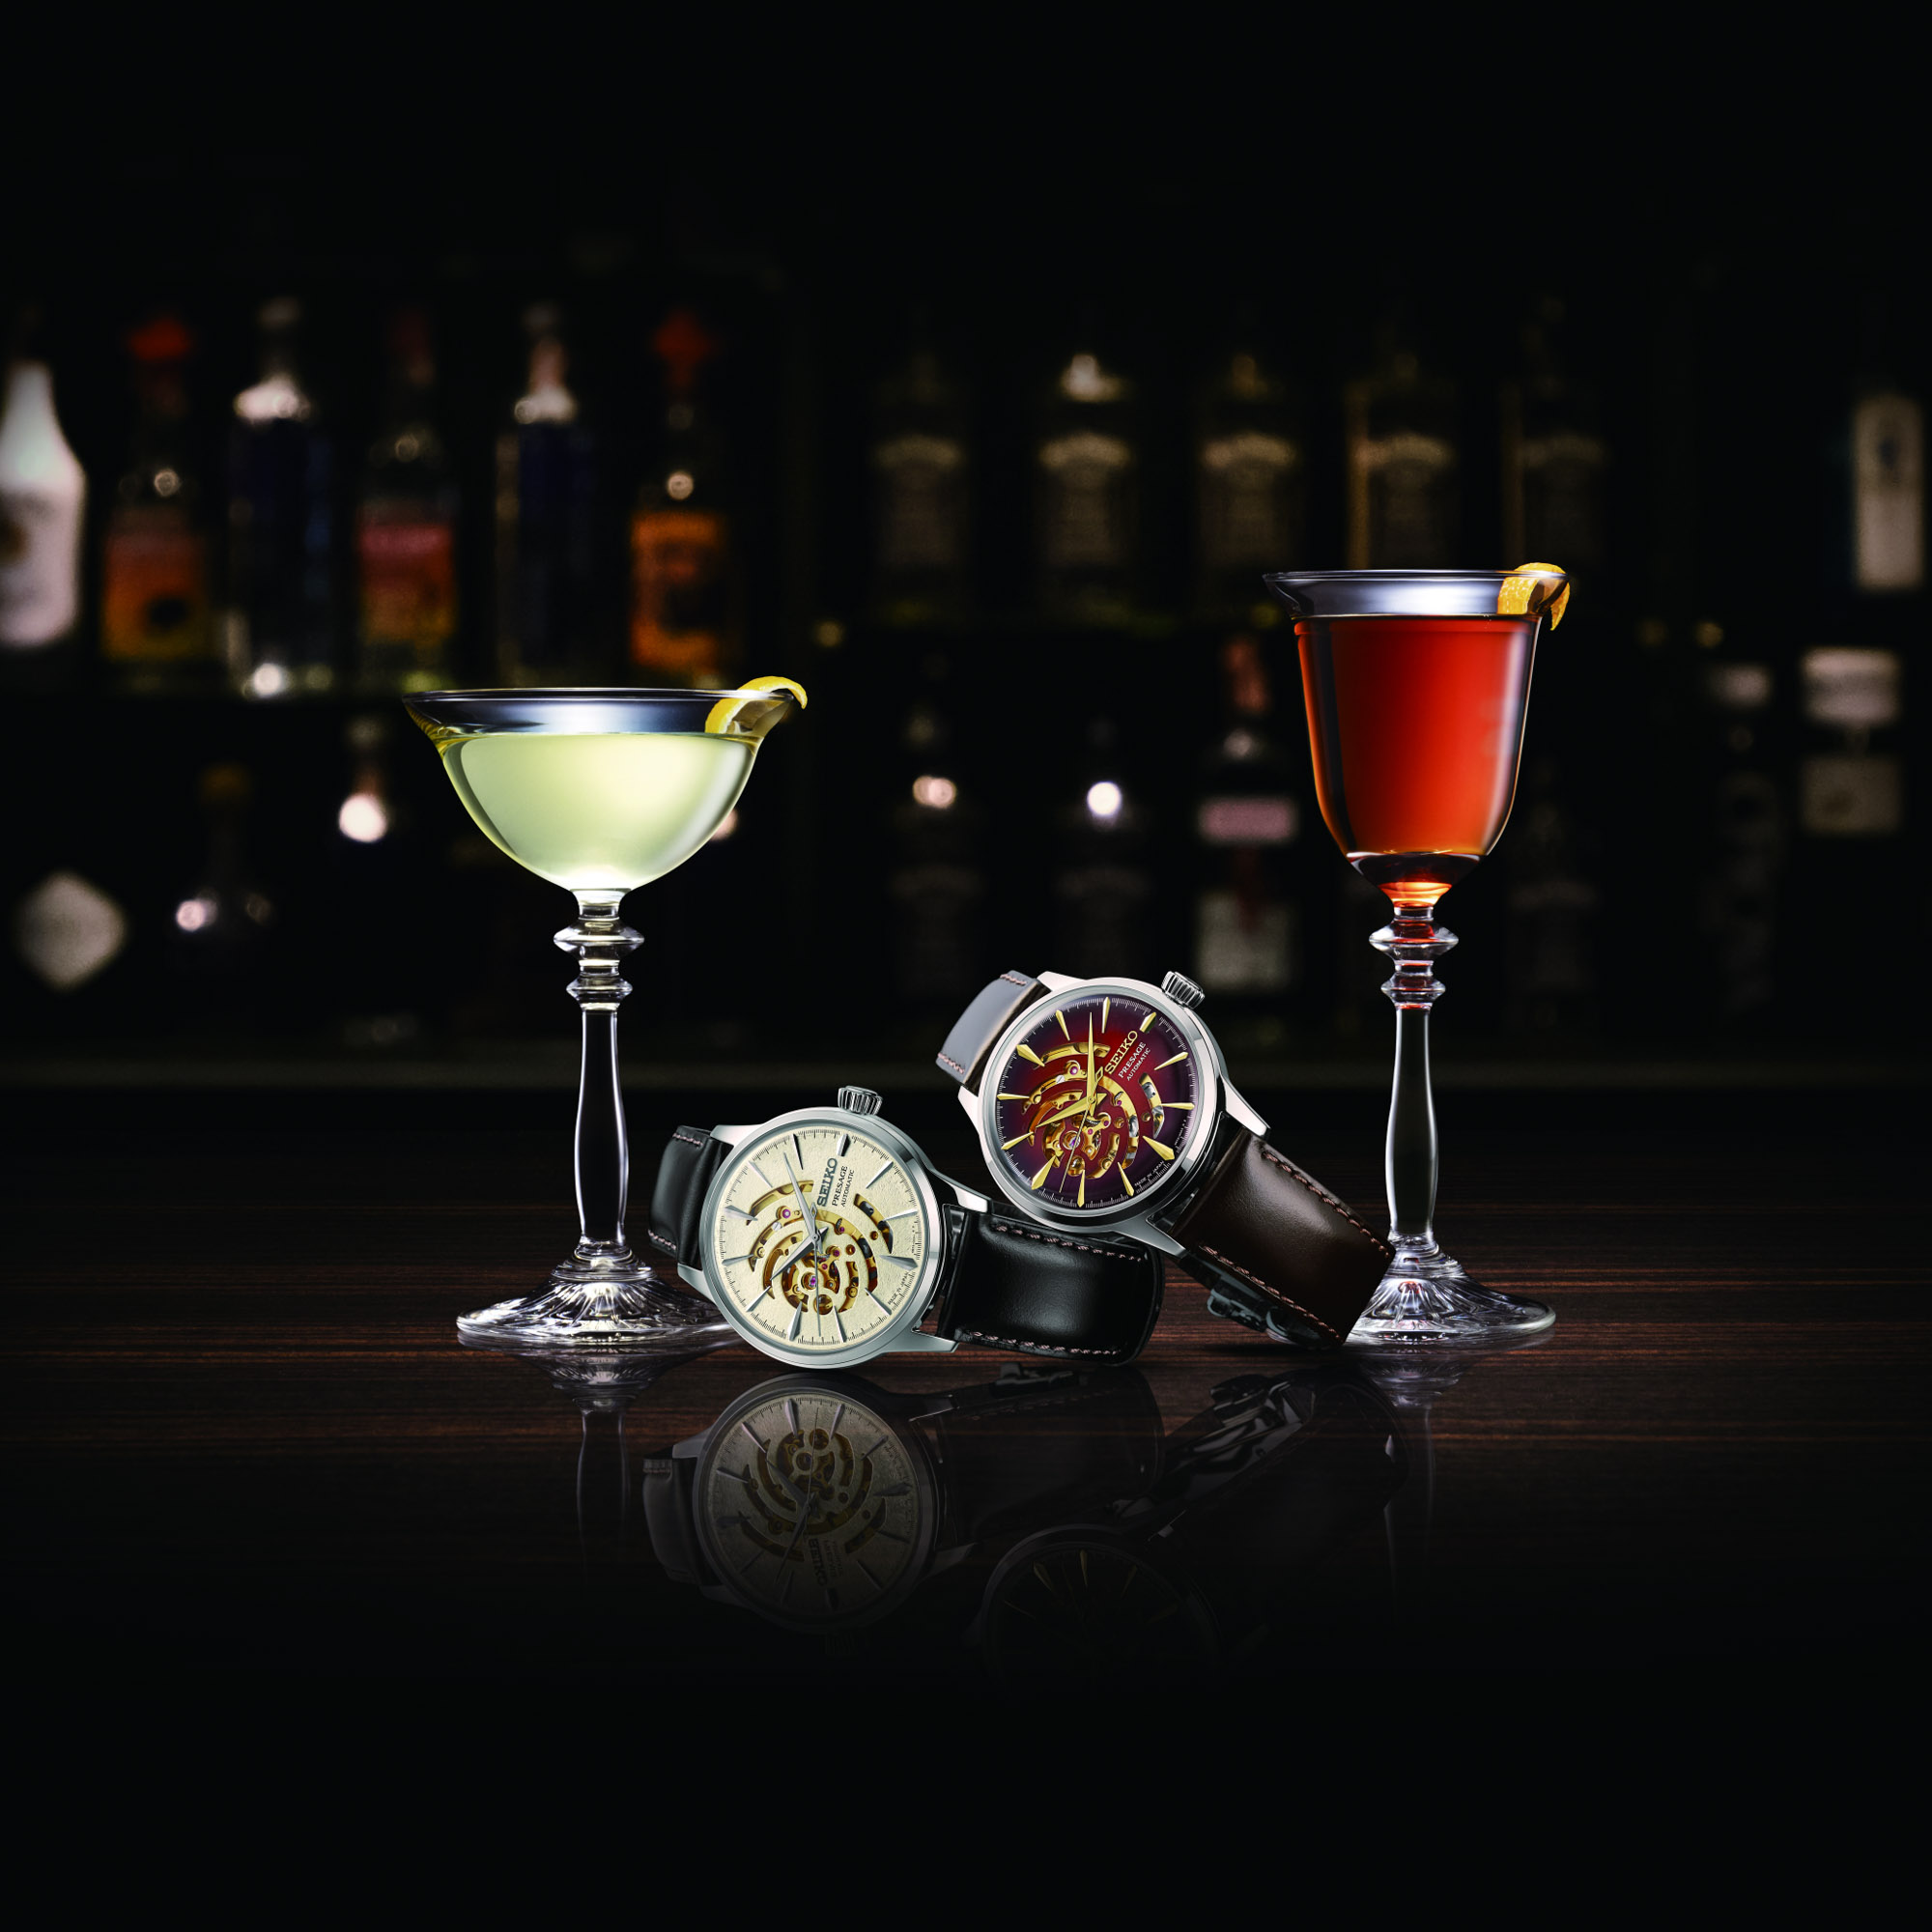 Seiko Introduces The New Presage Cocktail Time STAR BAR Limited Edition Watches